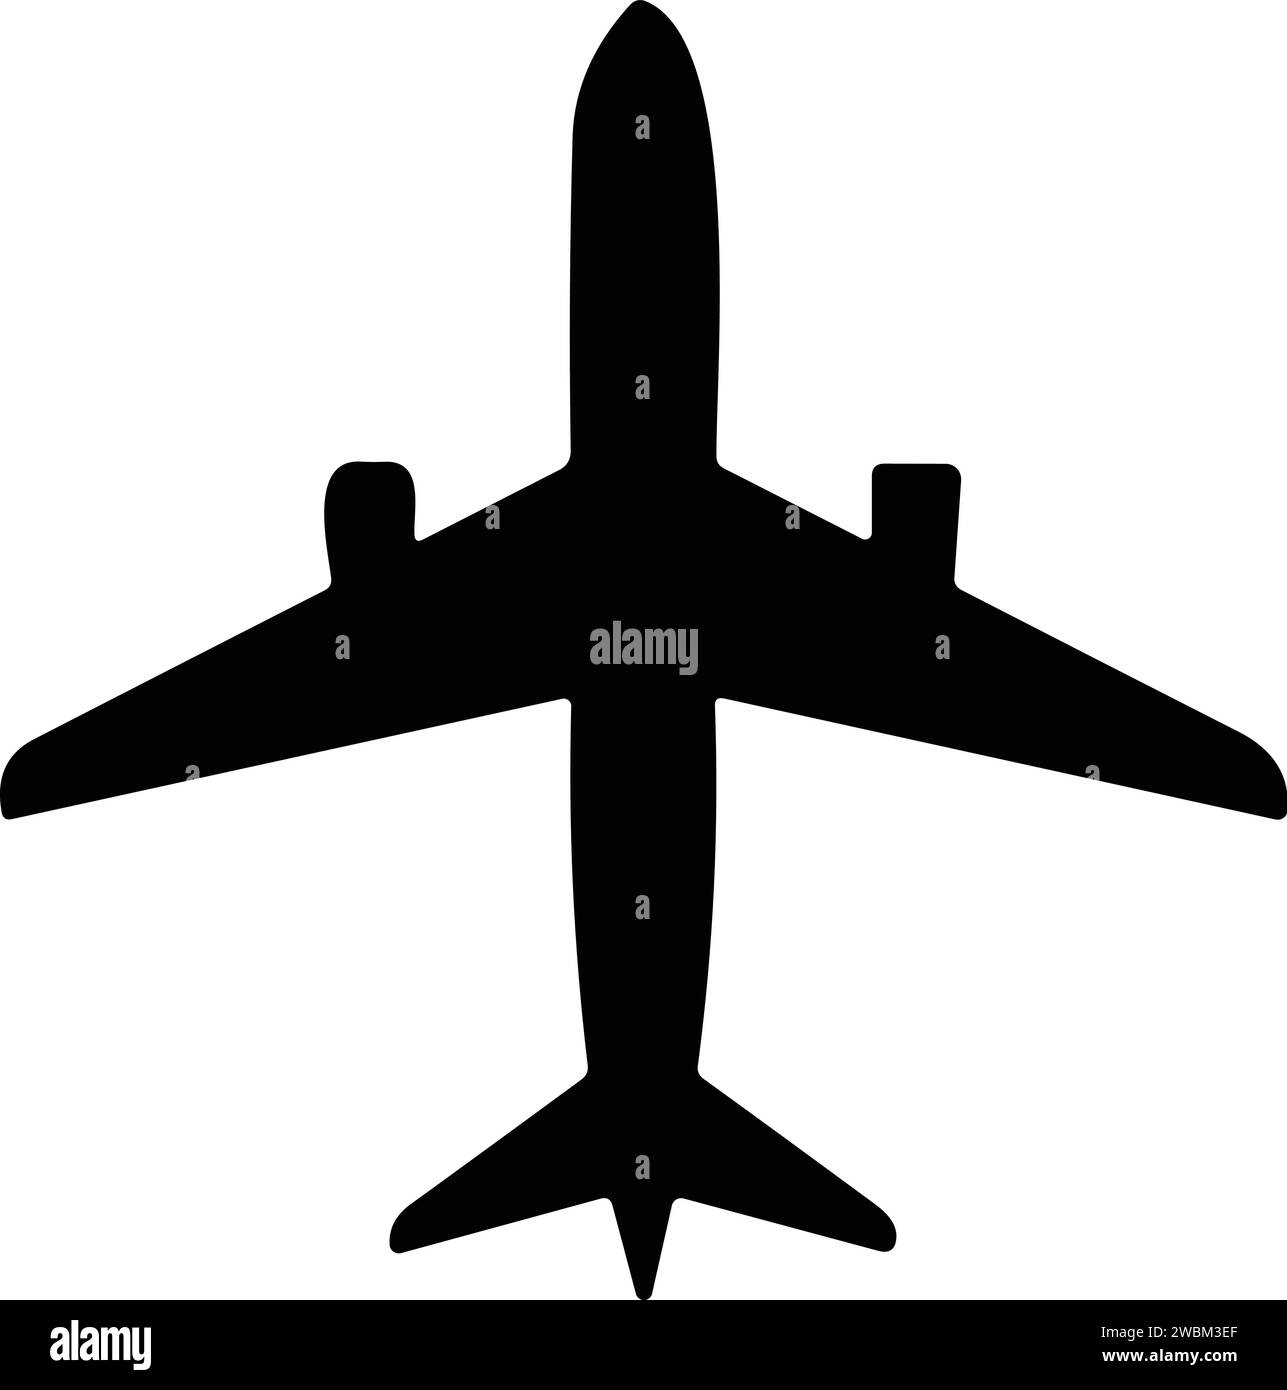 Airplane icons. Aircrafts flat style. jet plane. flight travel symbol. Stock Vector